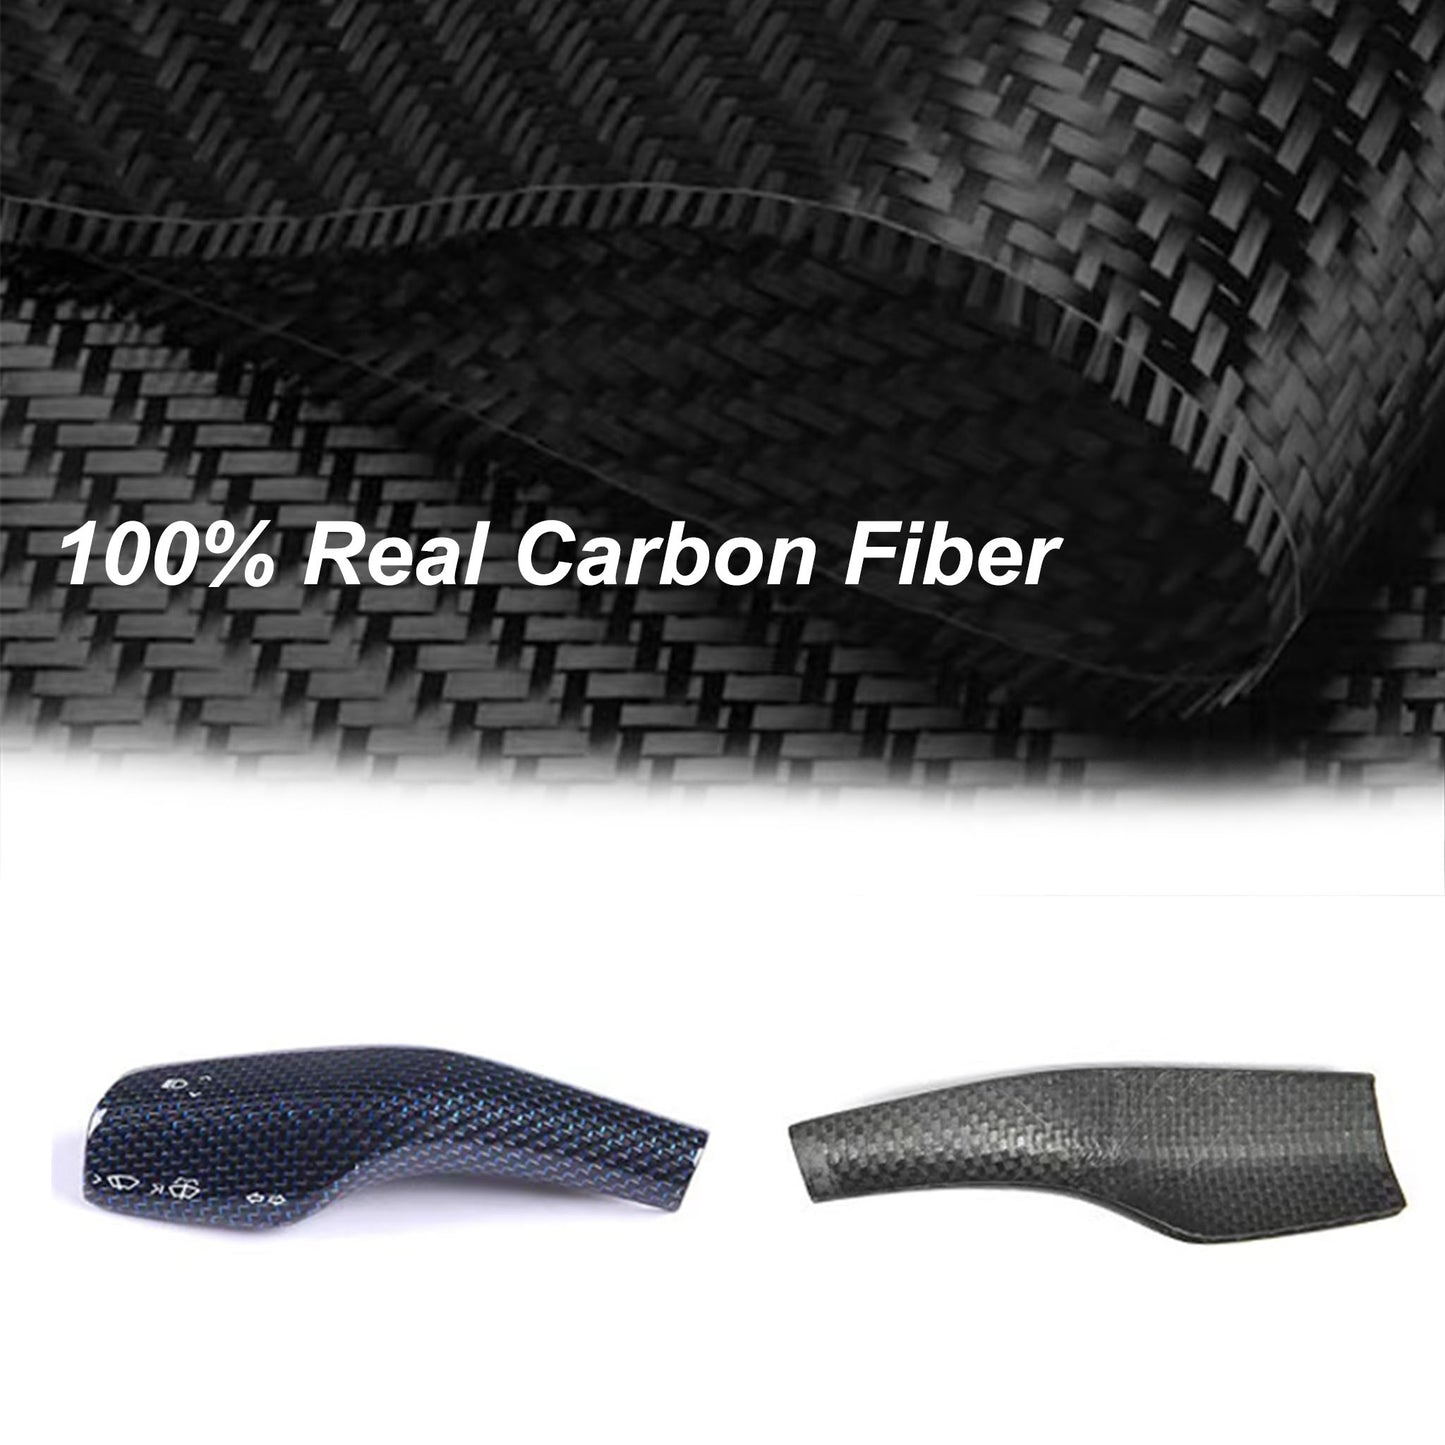 Gear Stalk Covers Real Carbon Fiber for Tesla Model 3/Y-Vehicles & Parts-Yeslak